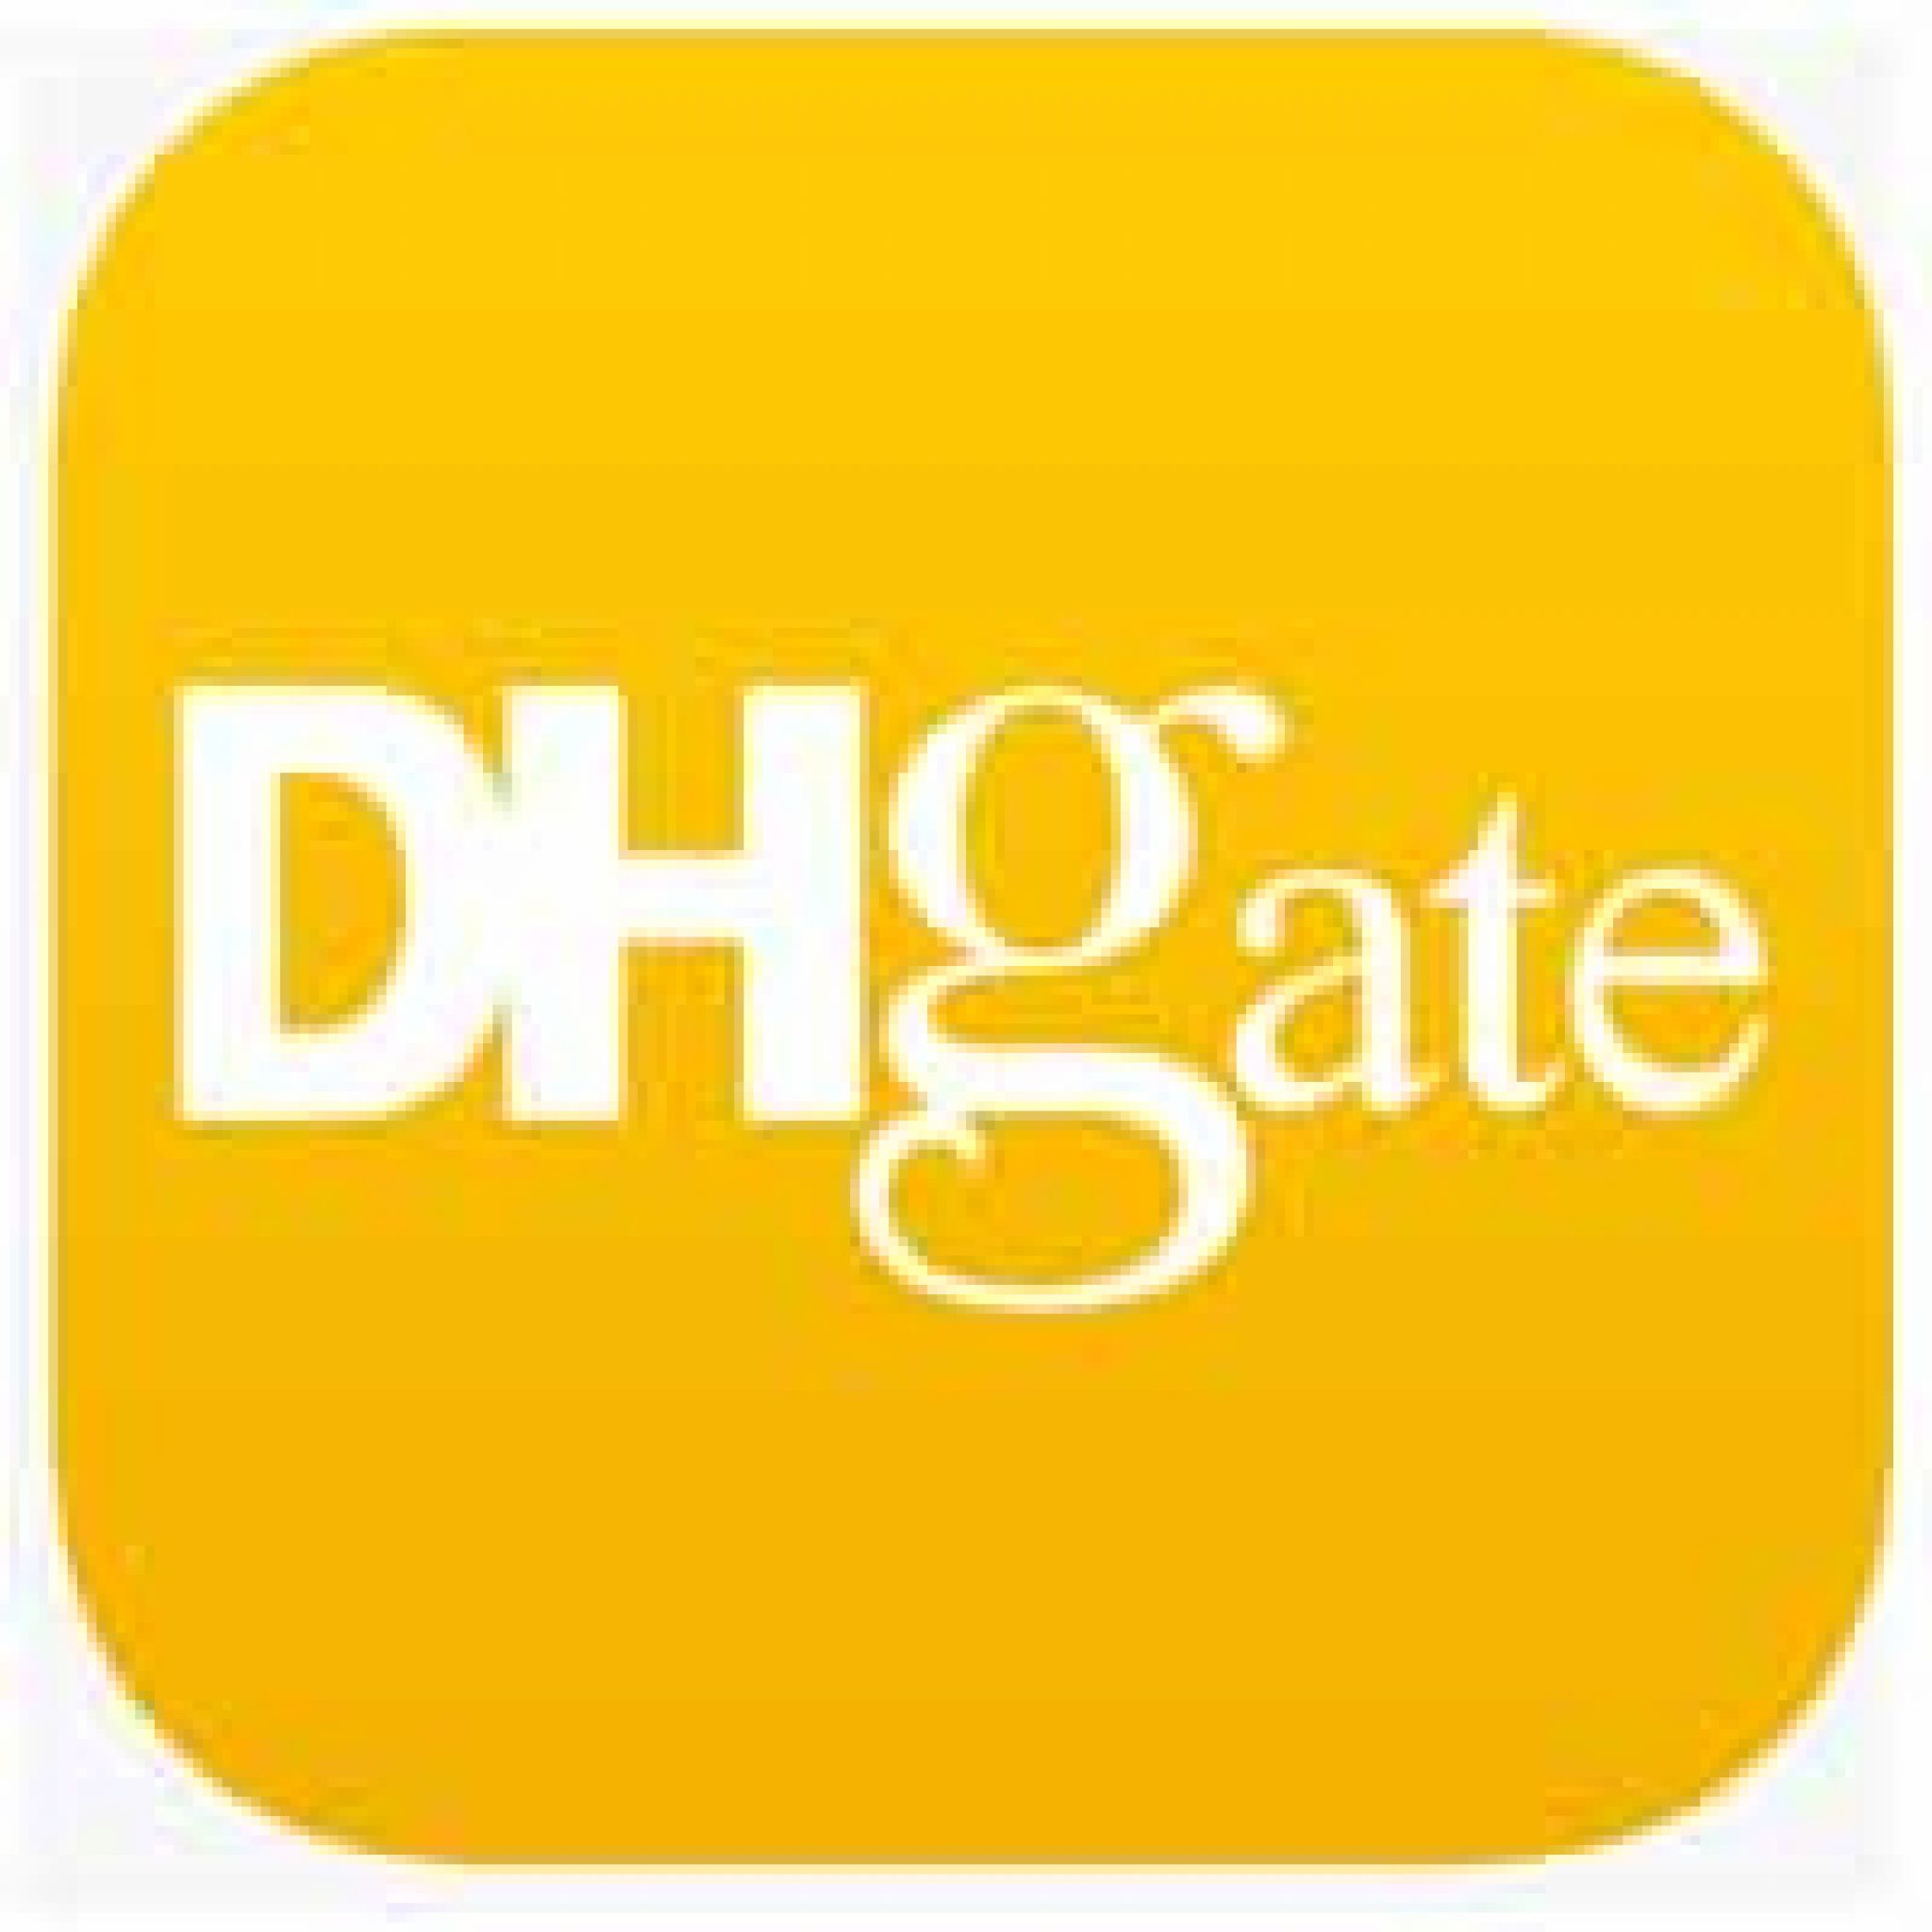 Dhgate Coupon, Promo Codes 2022 Up to 40 OFF Avail Code